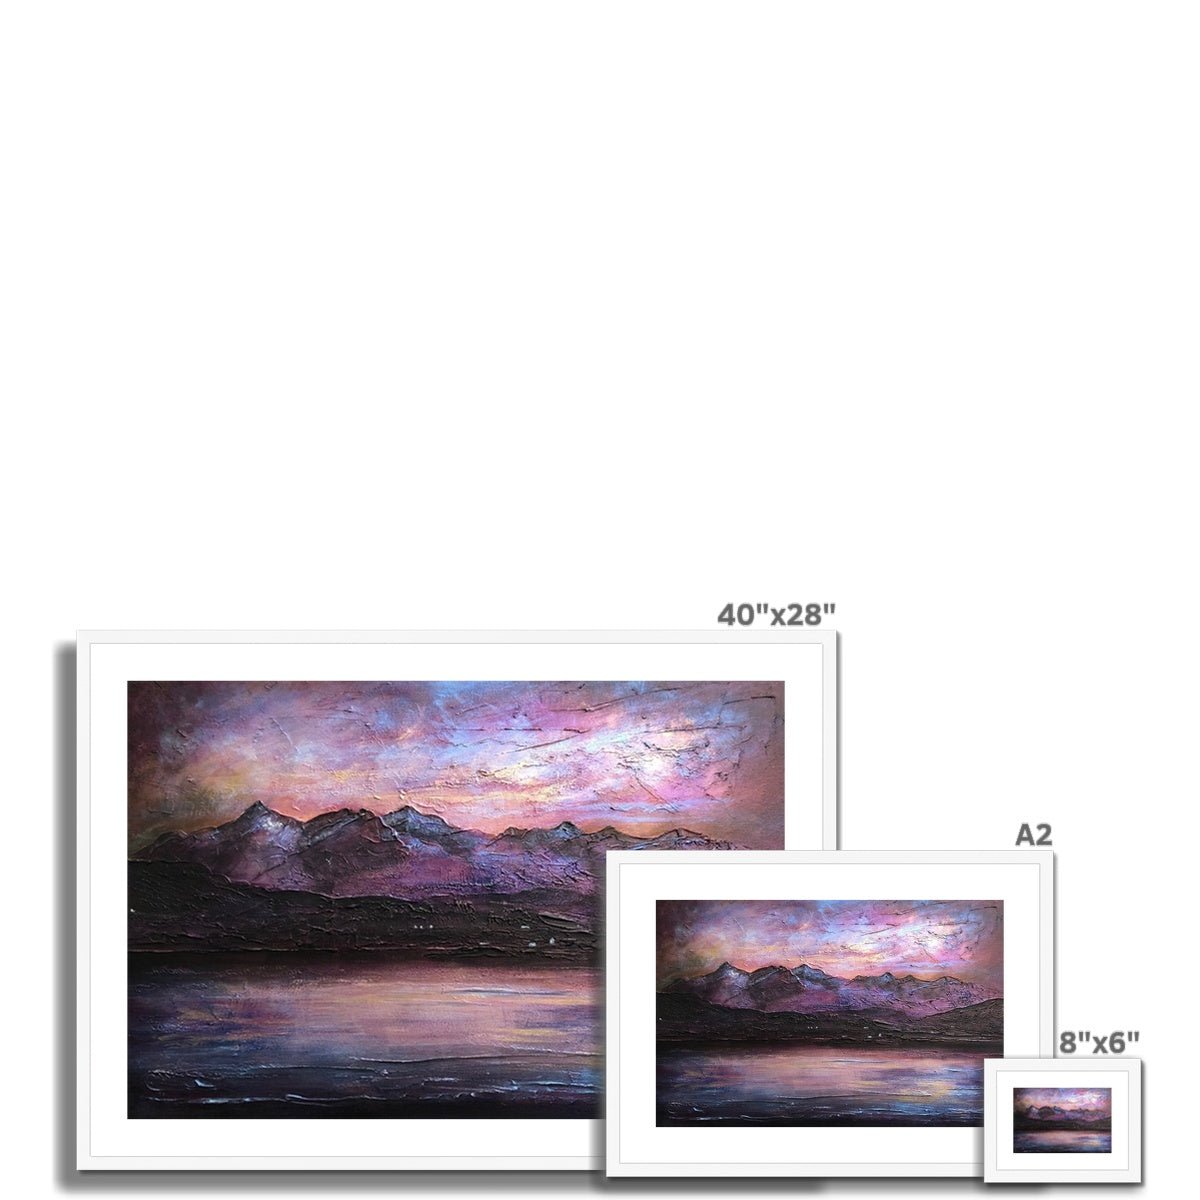 Last Skye Light Painting | Framed & Mounted Prints From Scotland-Framed & Mounted Prints-Skye Art Gallery-Paintings, Prints, Homeware, Art Gifts From Scotland By Scottish Artist Kevin Hunter